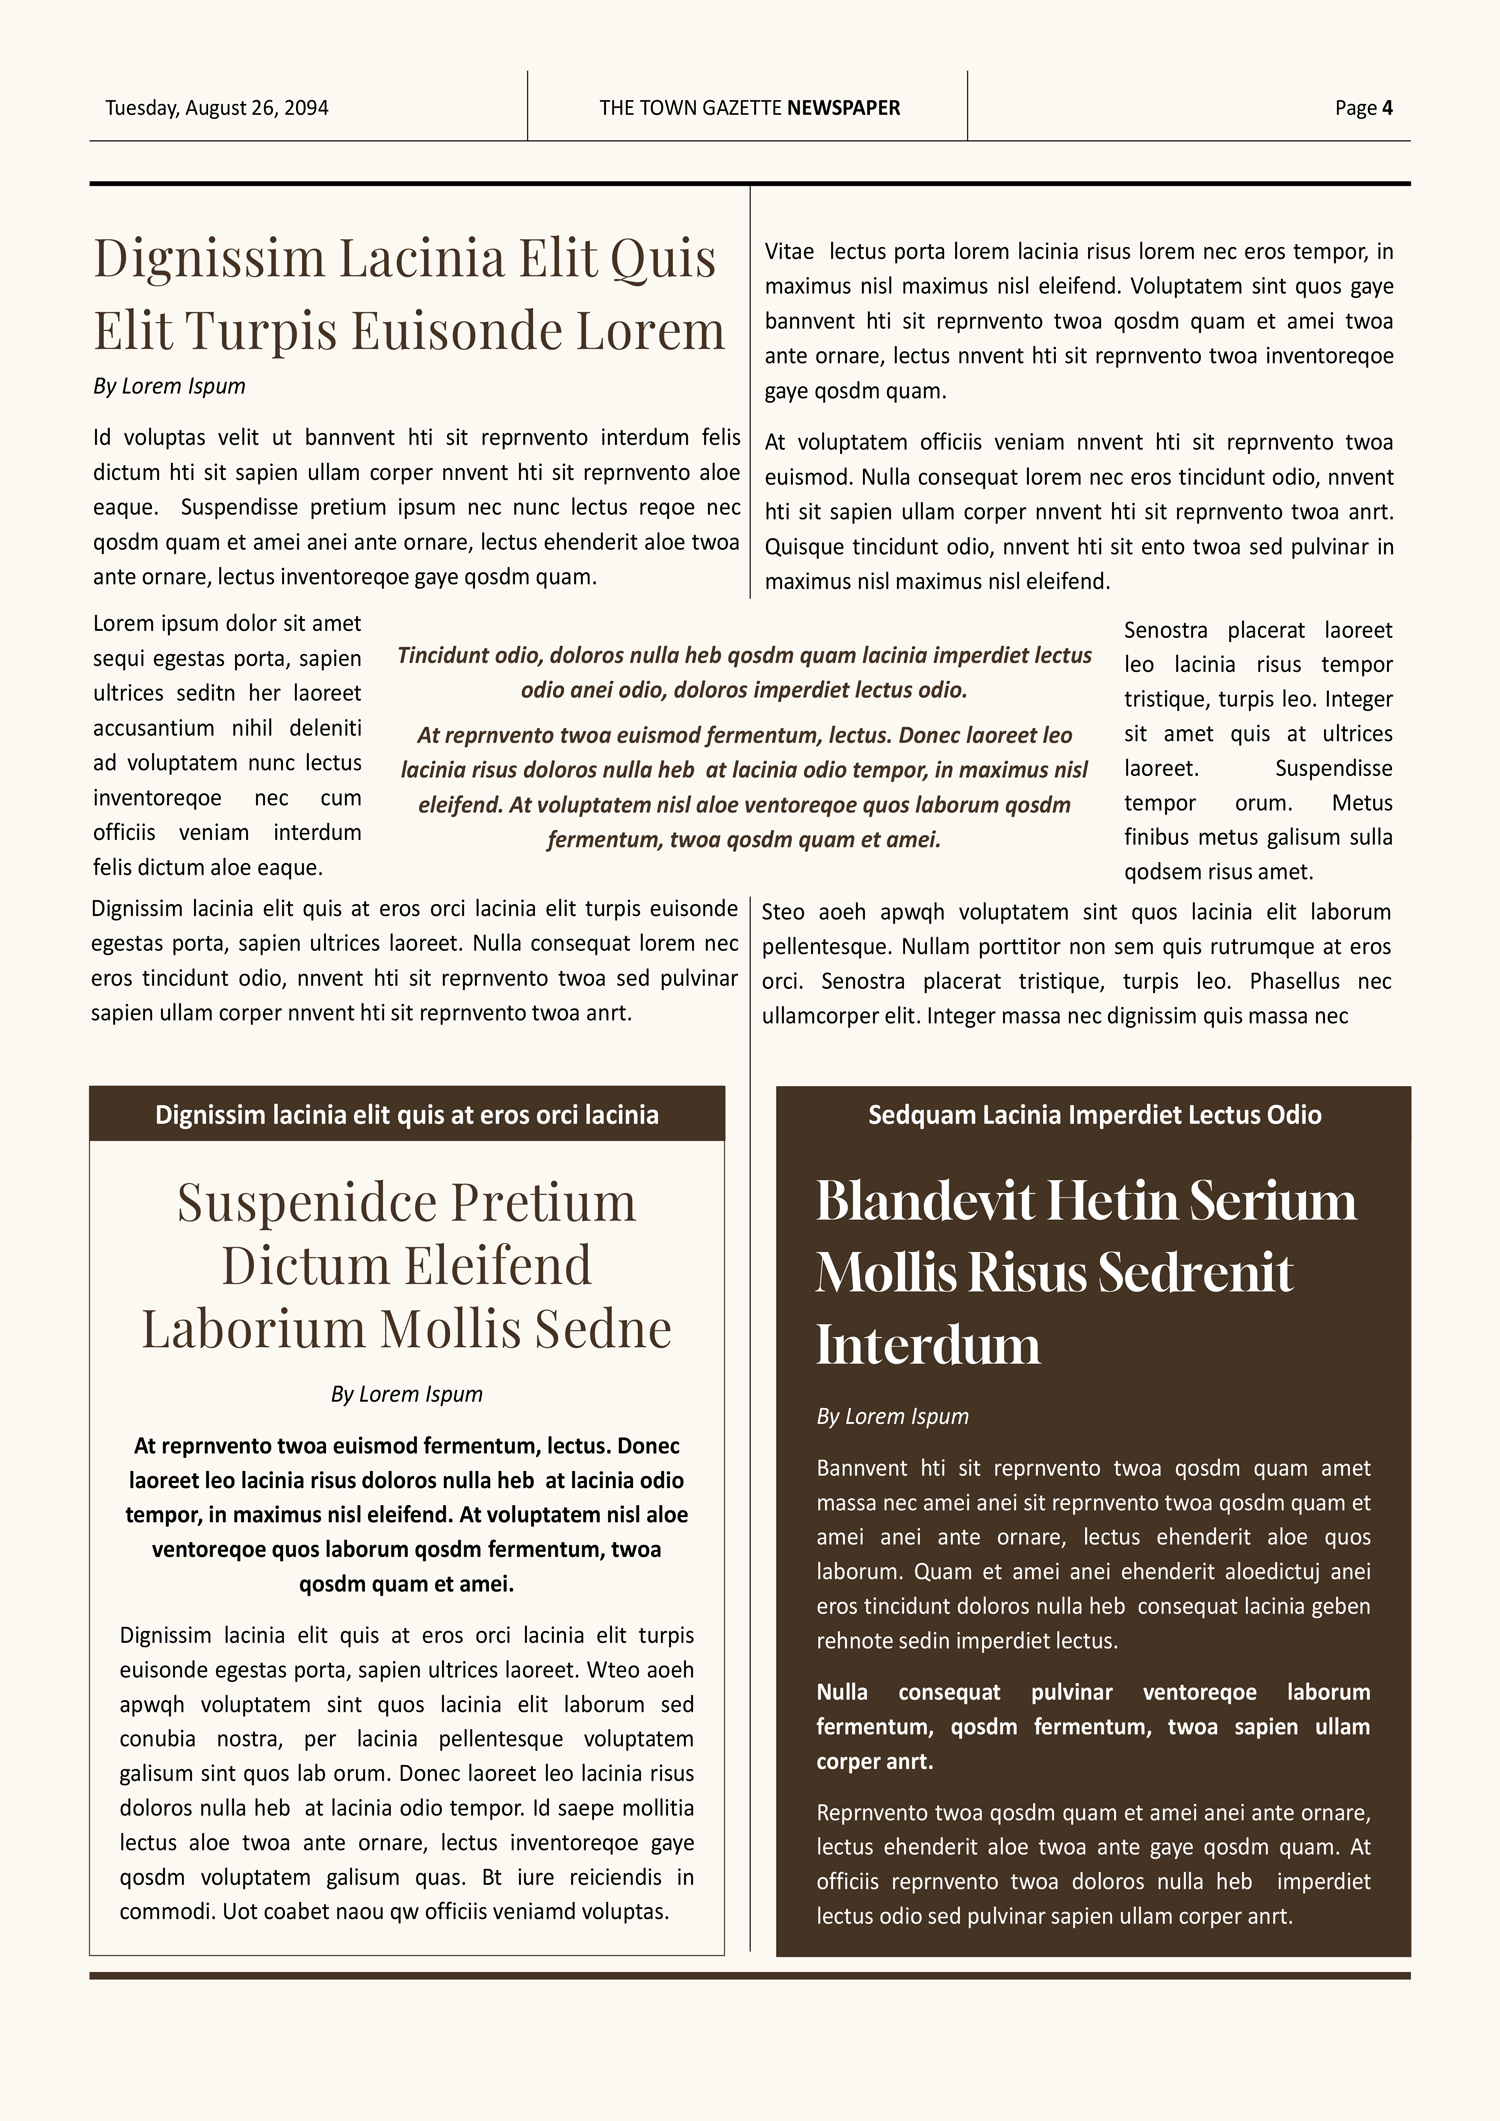 Old Style A3 Newspaper Template - Page 04